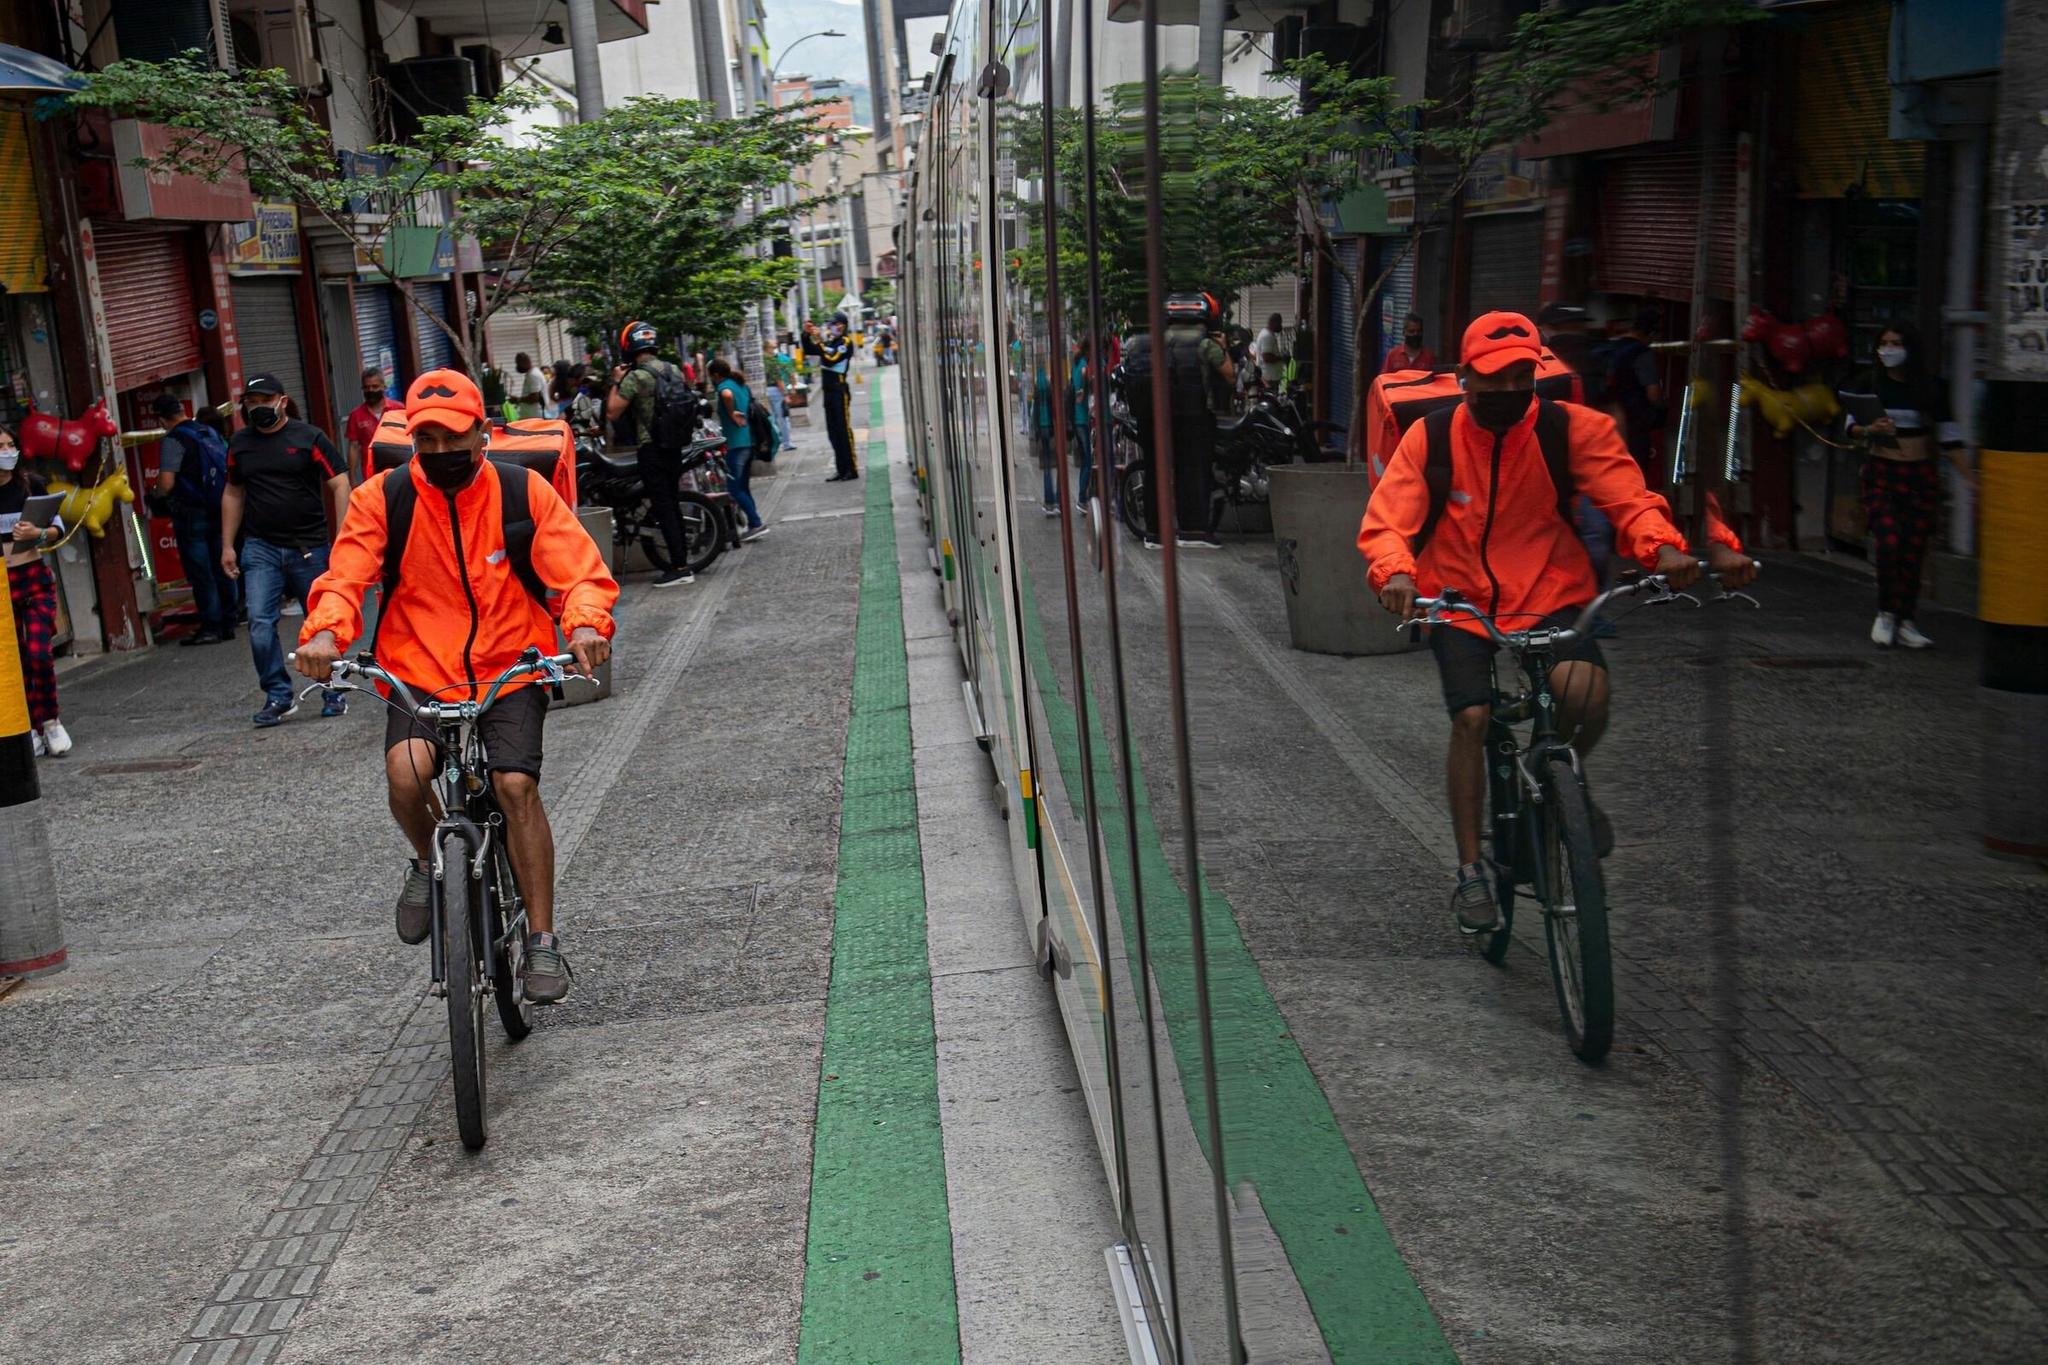 A man rides a delivery bicycle next to the tram amid the COVID-19 pandemic, in Medellin, Colombia.